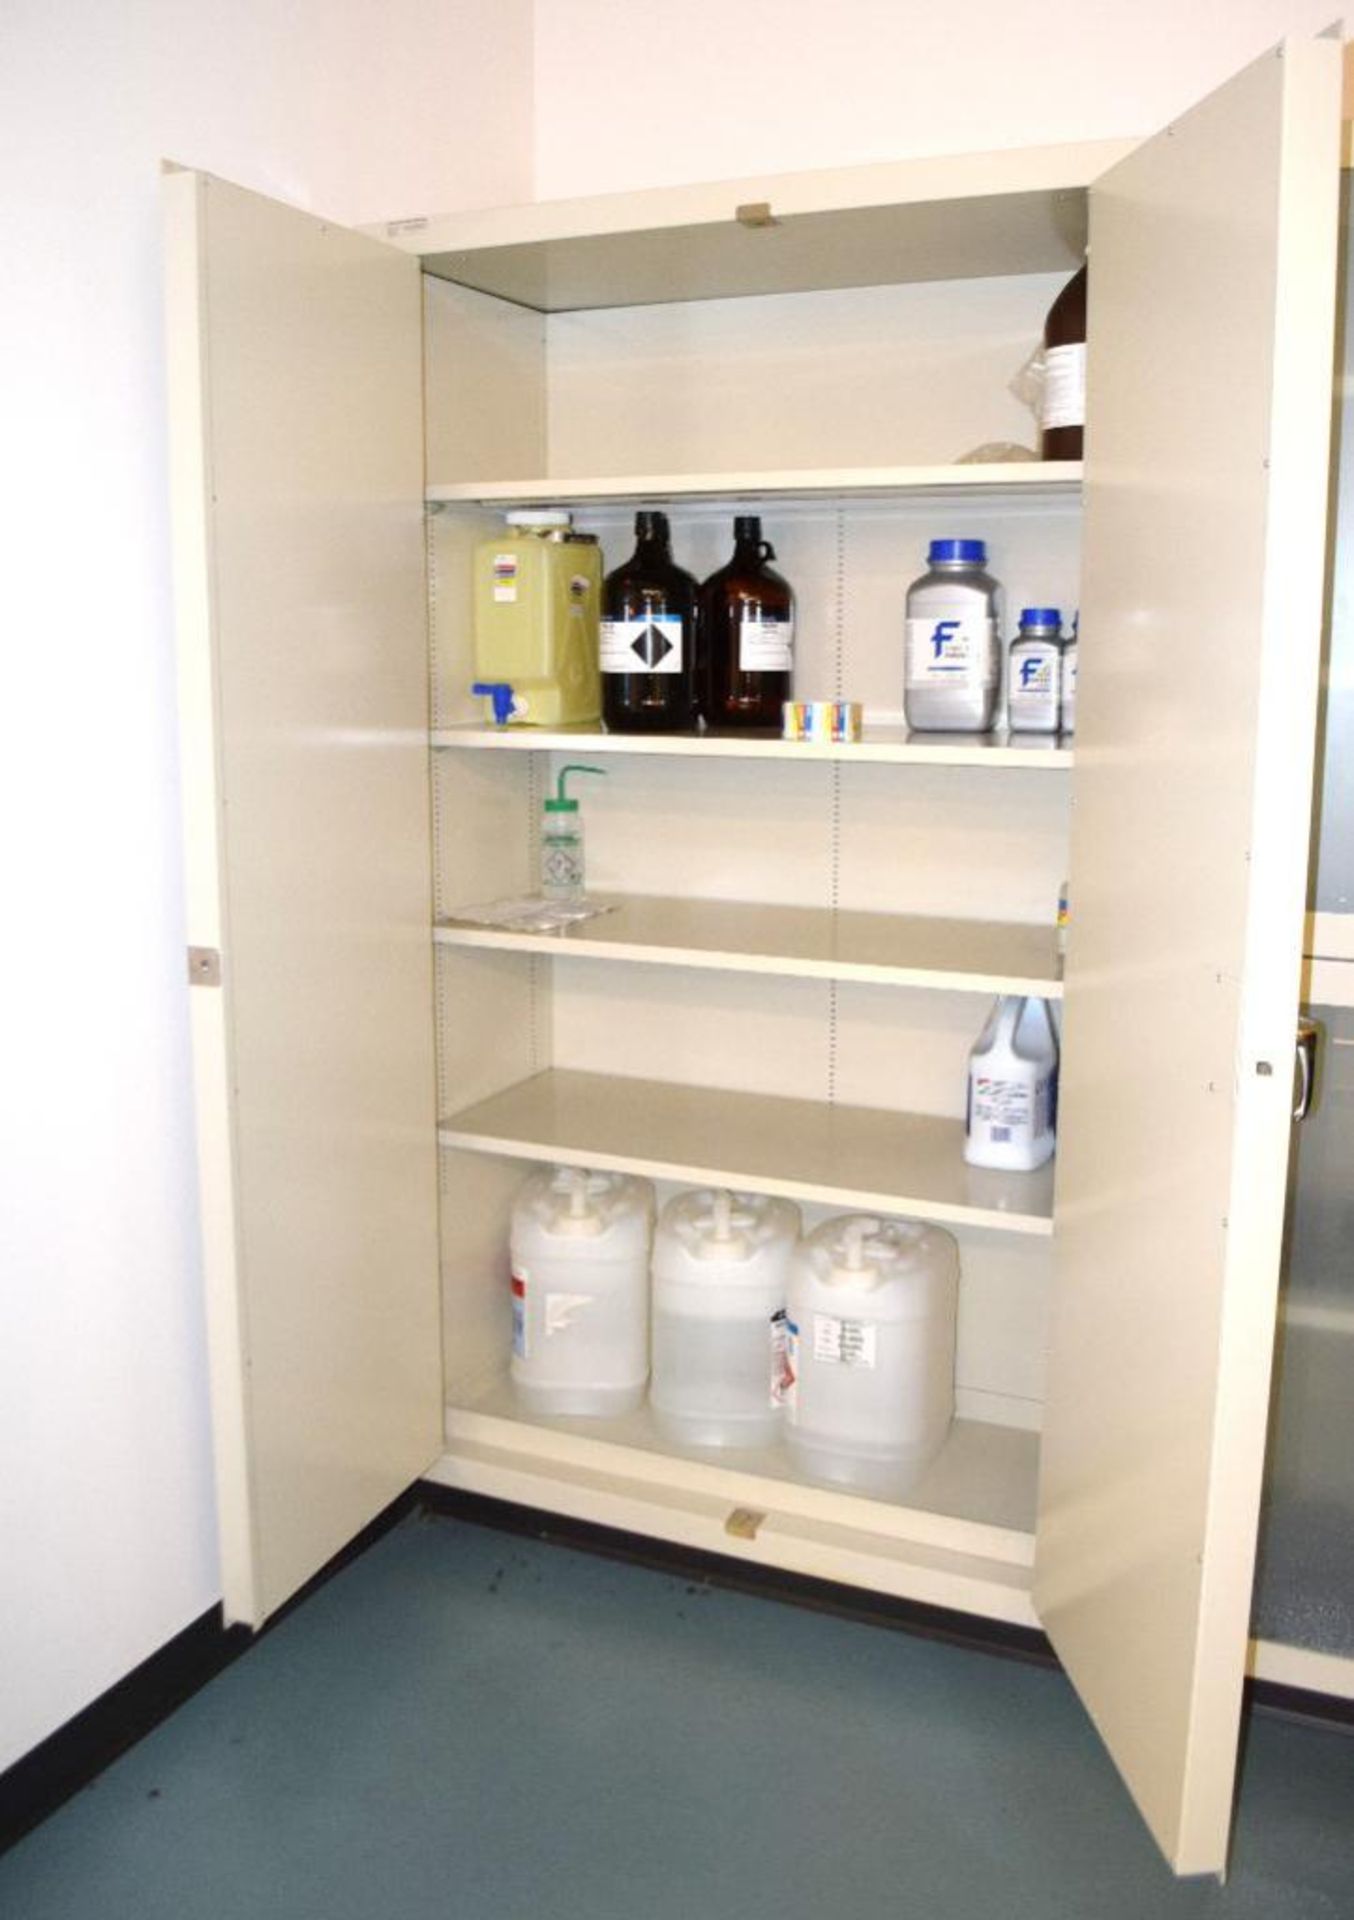 Mott Manufacturing 2 Door Flammable Liquid Storage Cabinet, Approximate 48" wide x 84" tall. - Image 2 of 3